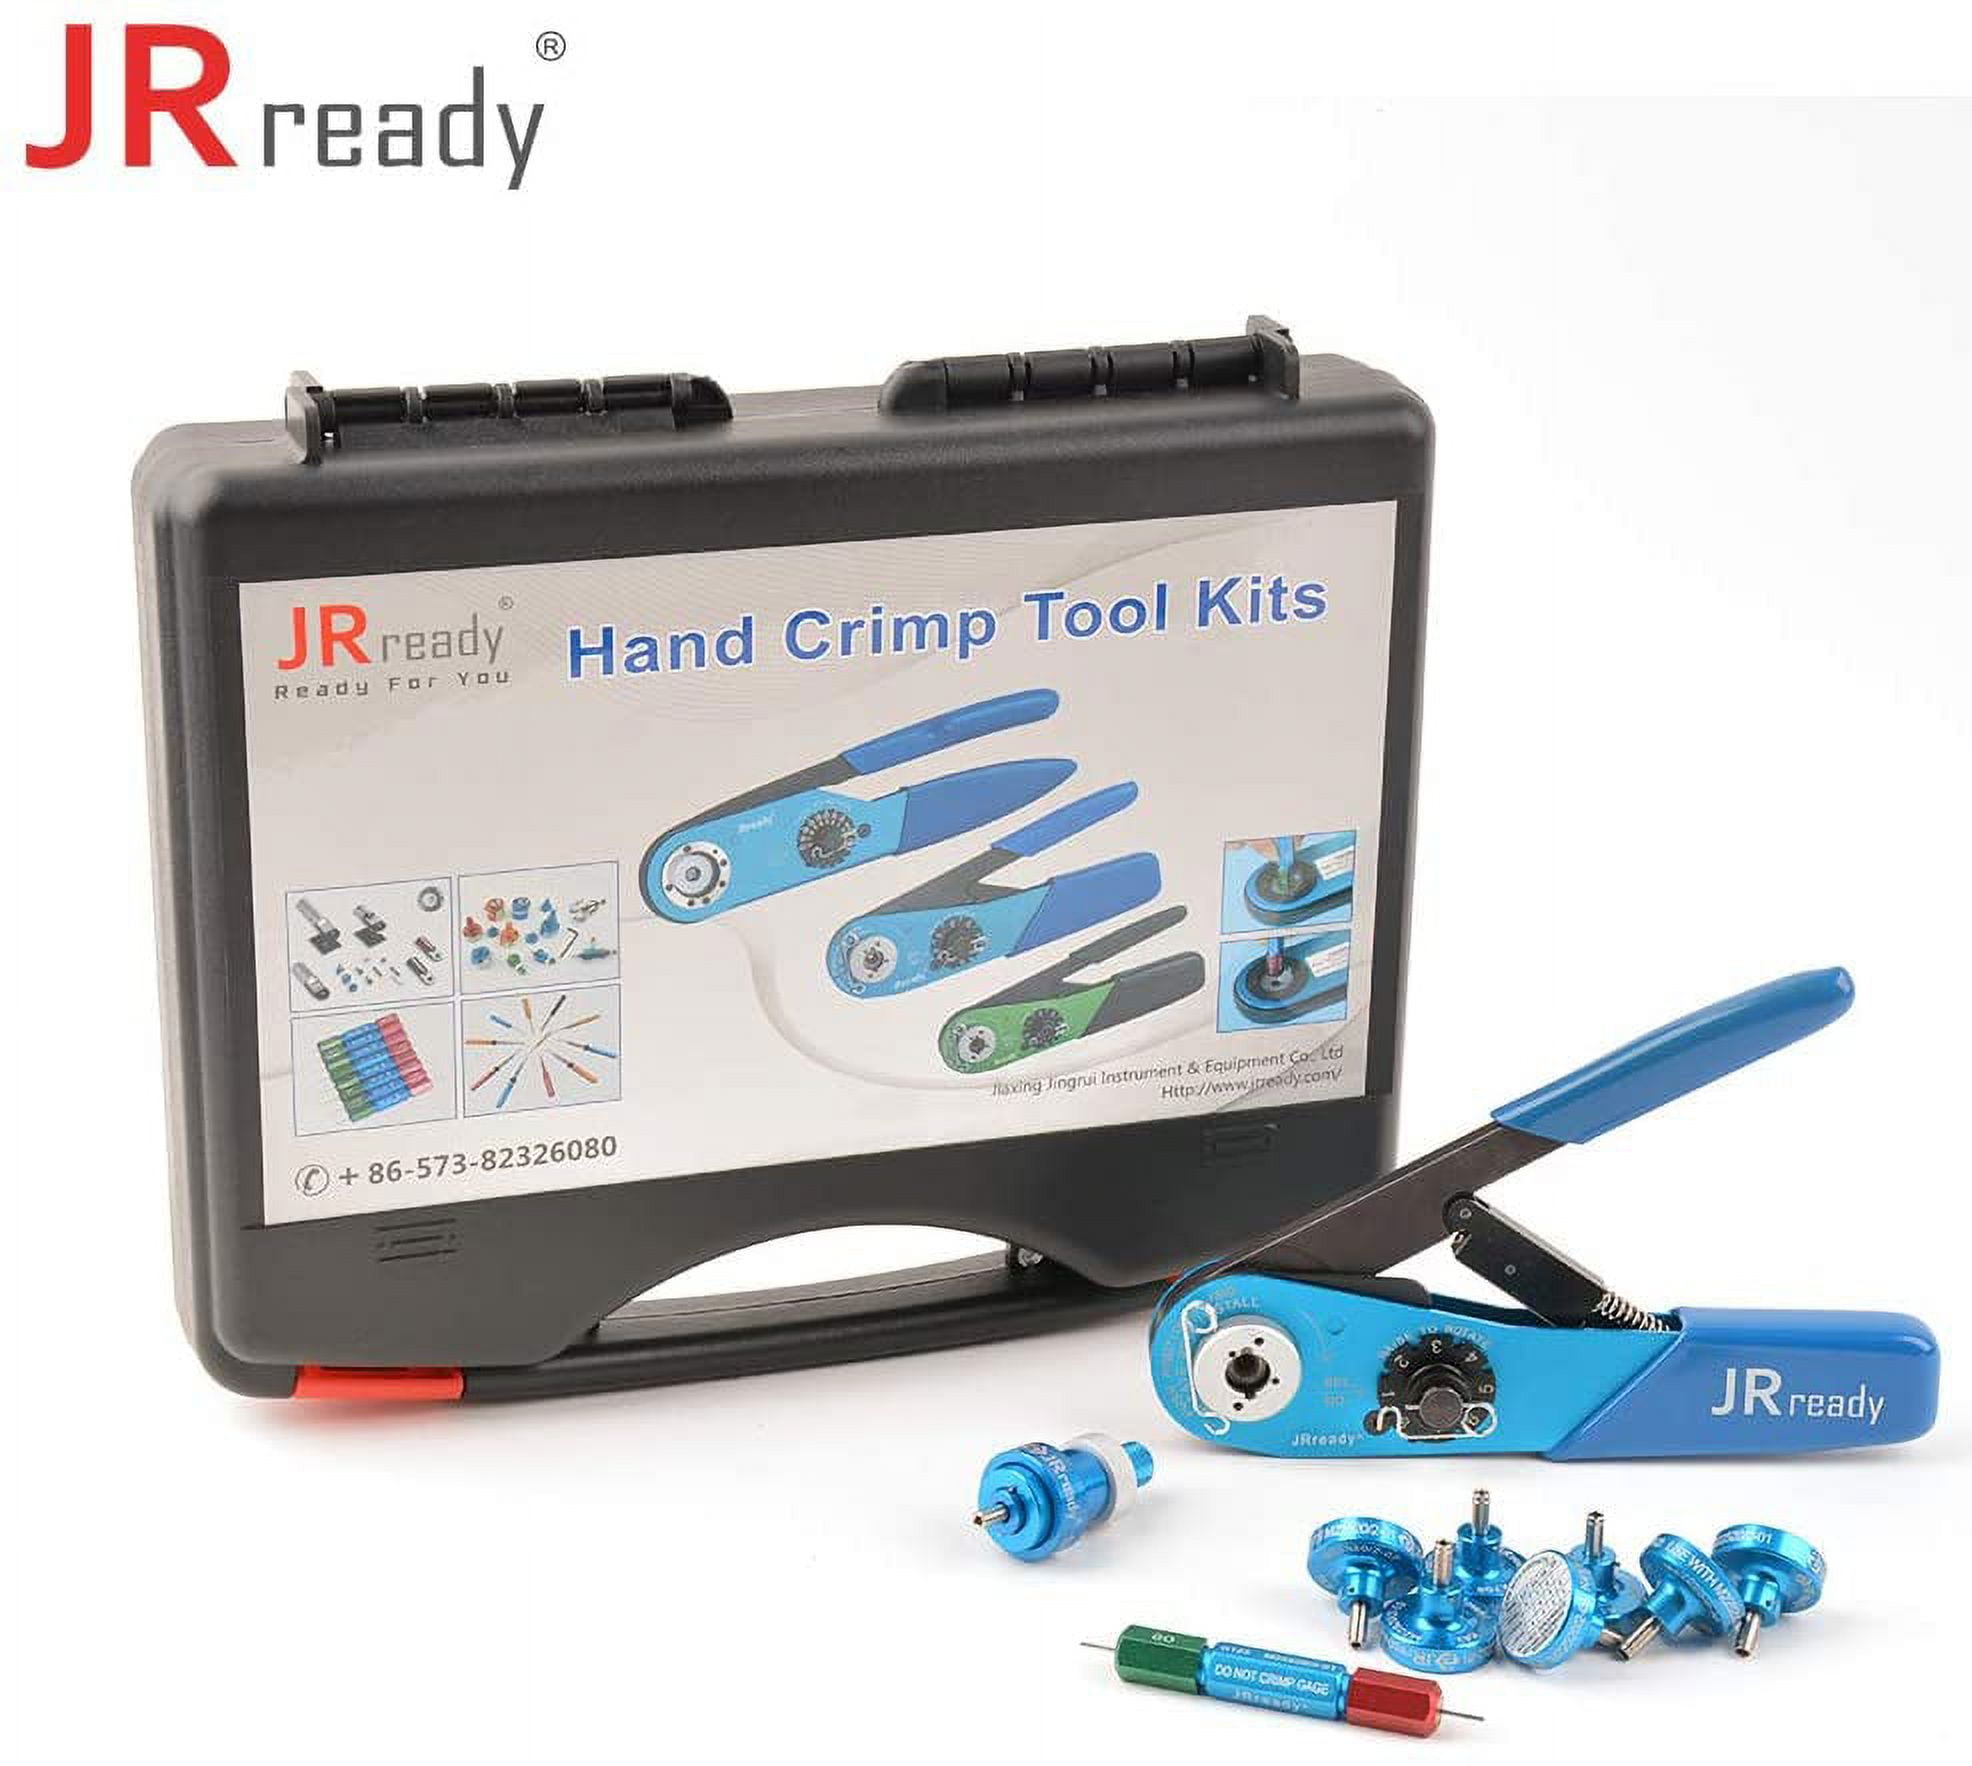 Electronic JRready Crimp W1A Indent 615717 Solid 7 Aviation Contact Kit Gauge 32awg Miniature ST2060 G125 Positioner 01 and Barrel 20 Tool for in and YJQ 2 of Systems Connector M22520 Crimper